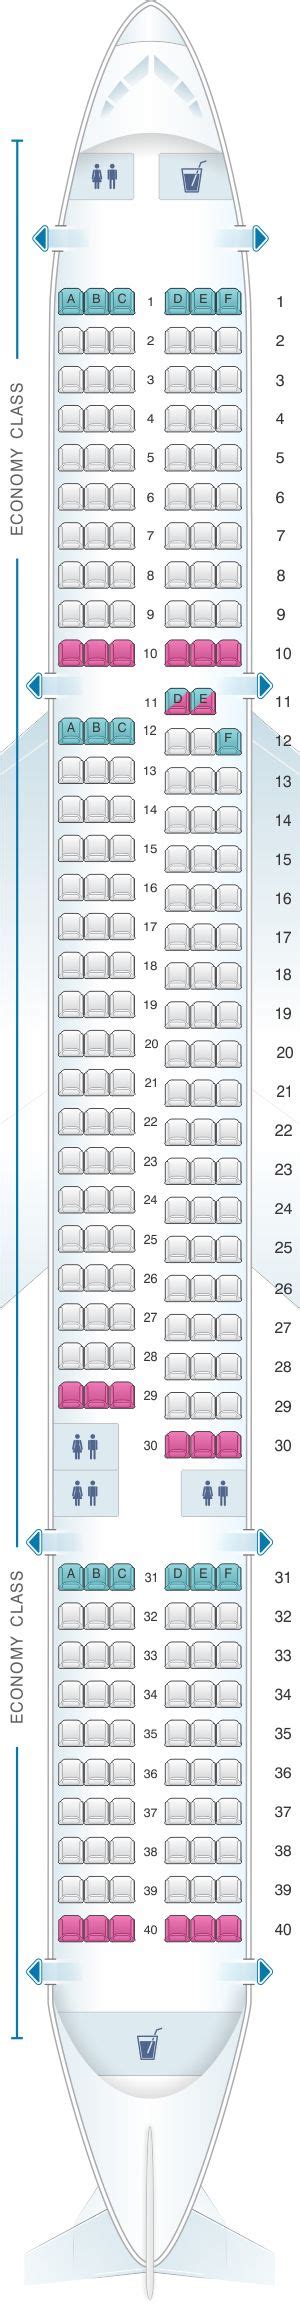 Tui Boeing 737 800 Seating Chart